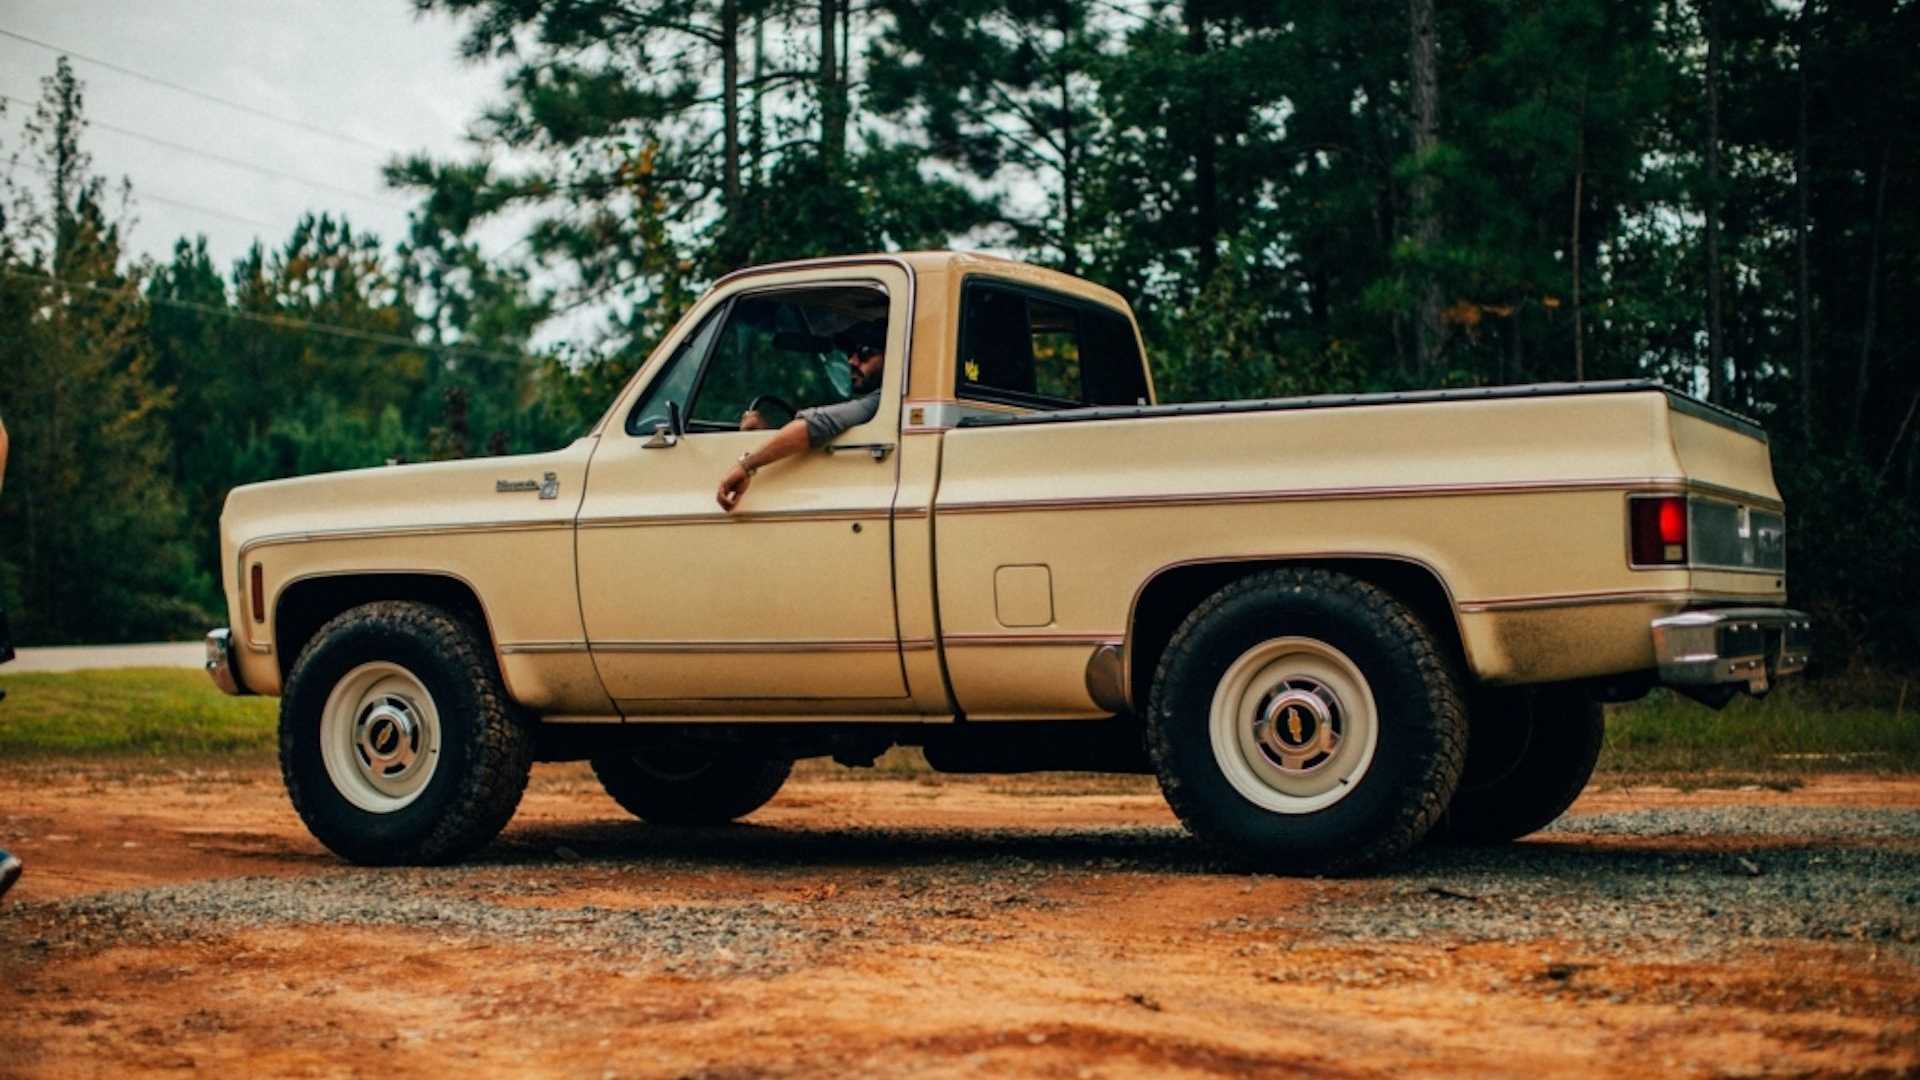 This 'New' Chevy Square Body Truck Takes Away The Pain Of Rebuilding One